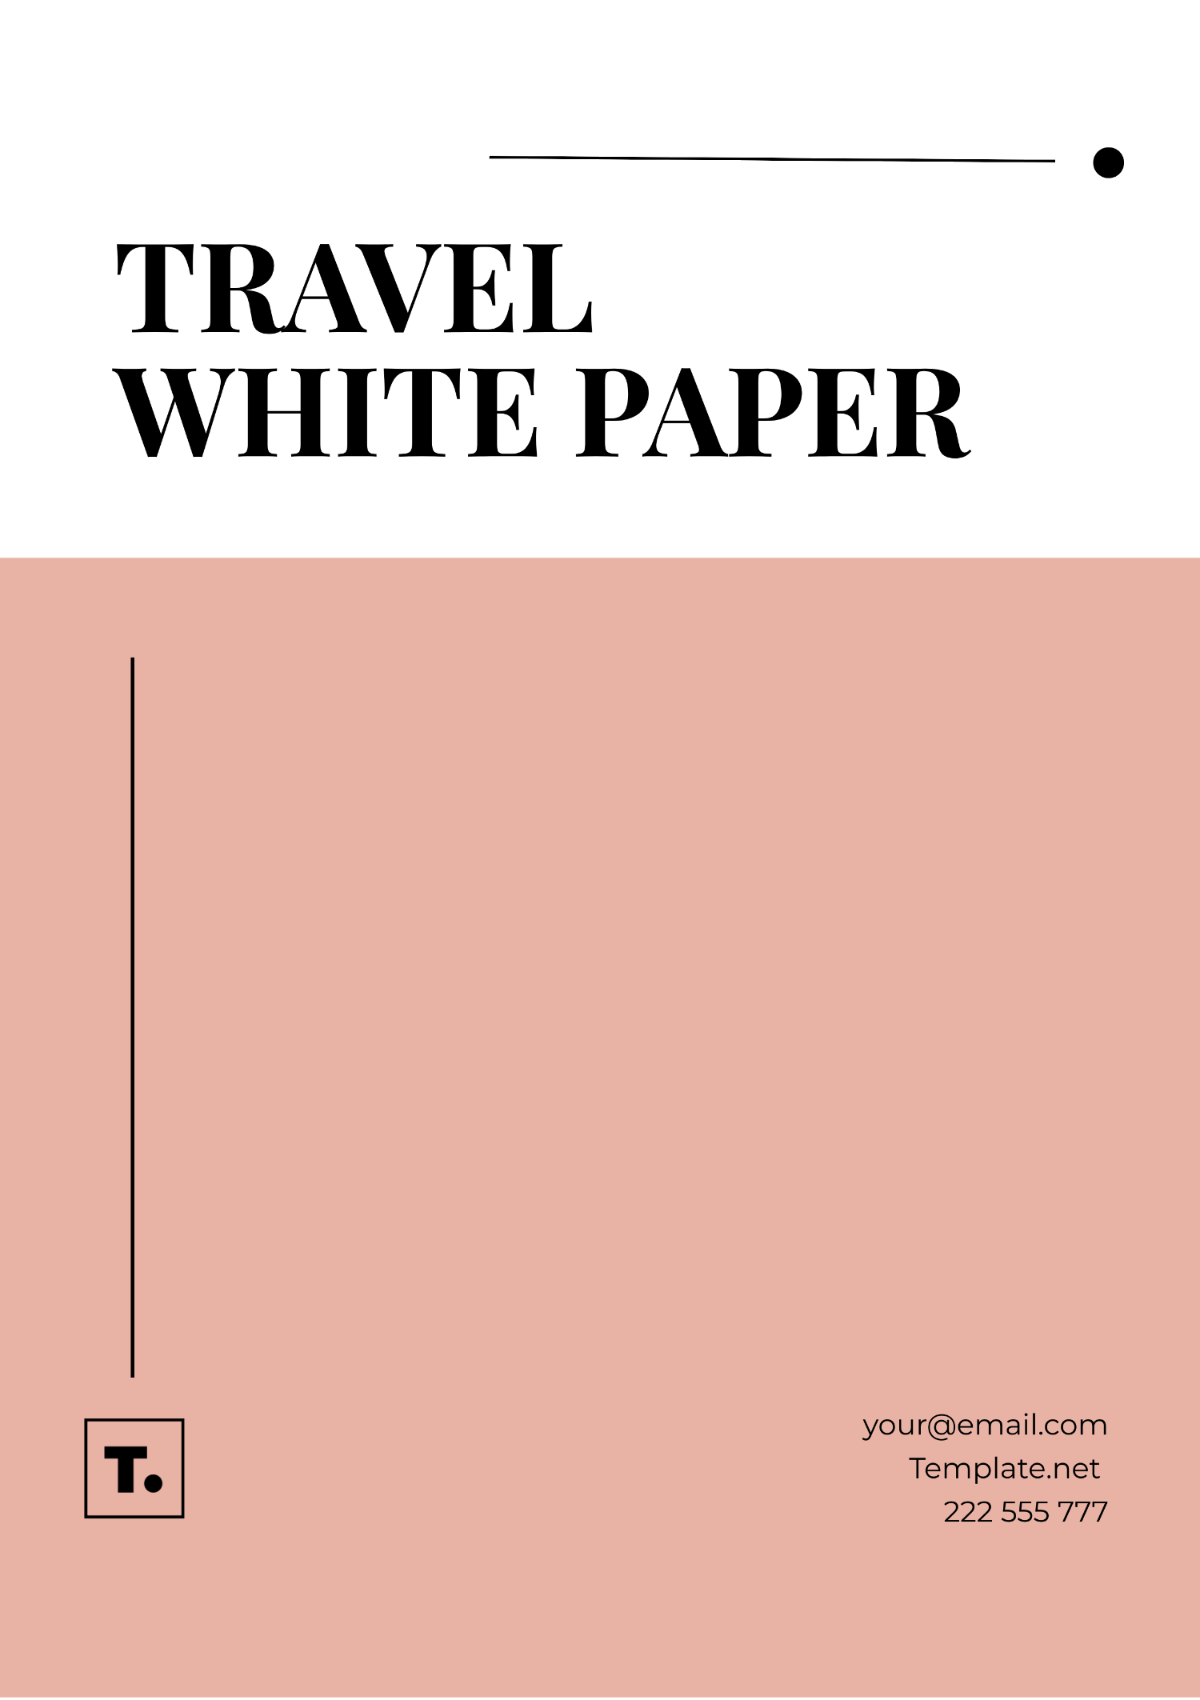 Travel White Paper Template